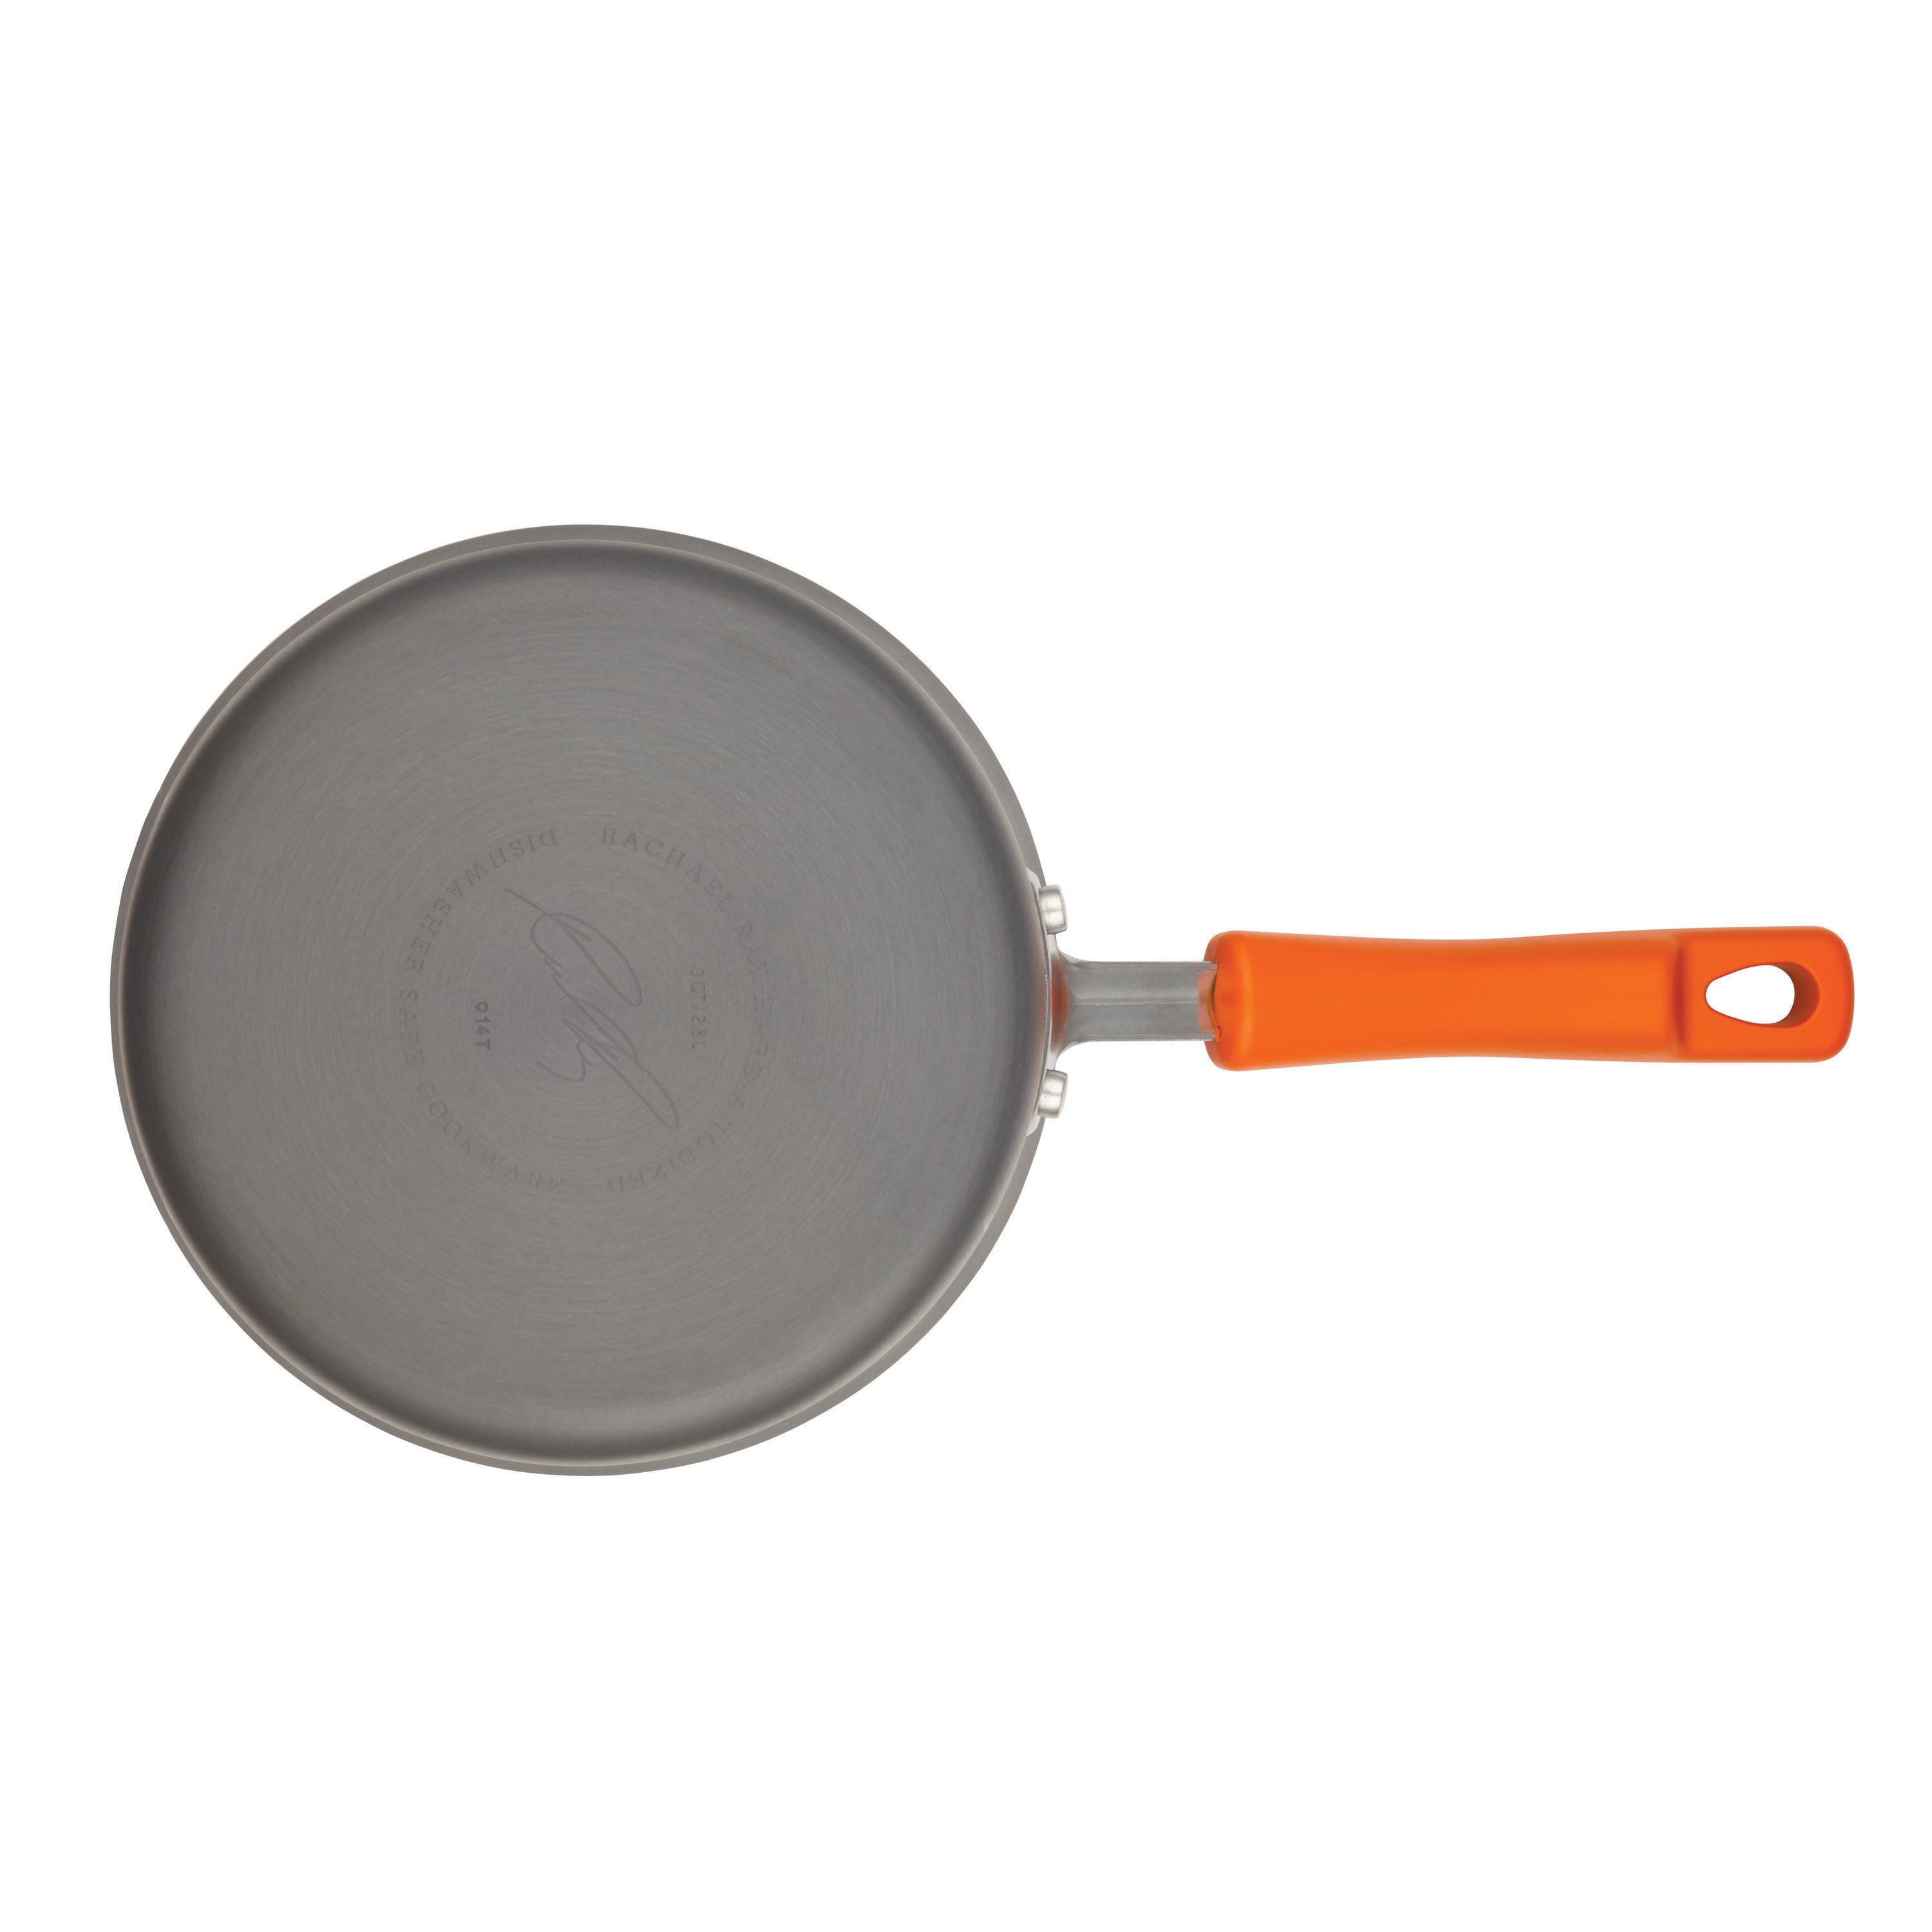 Rachael Ray Professional Hard Anodized 14 Skillet